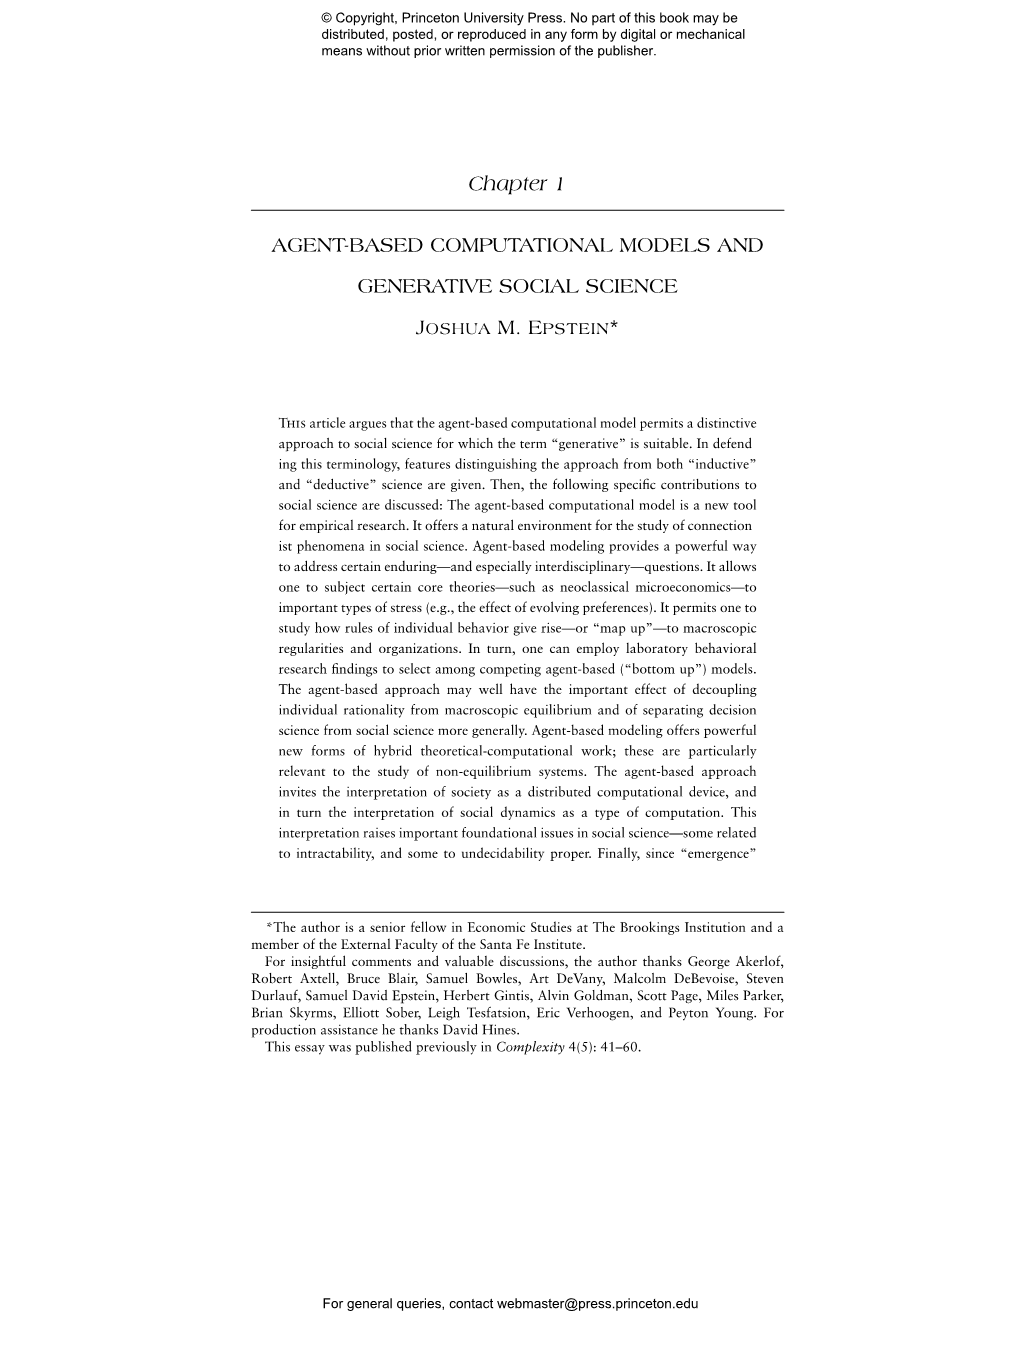 Chapter 1 AGENT-BASED COMPUTATIONAL MODELS AND